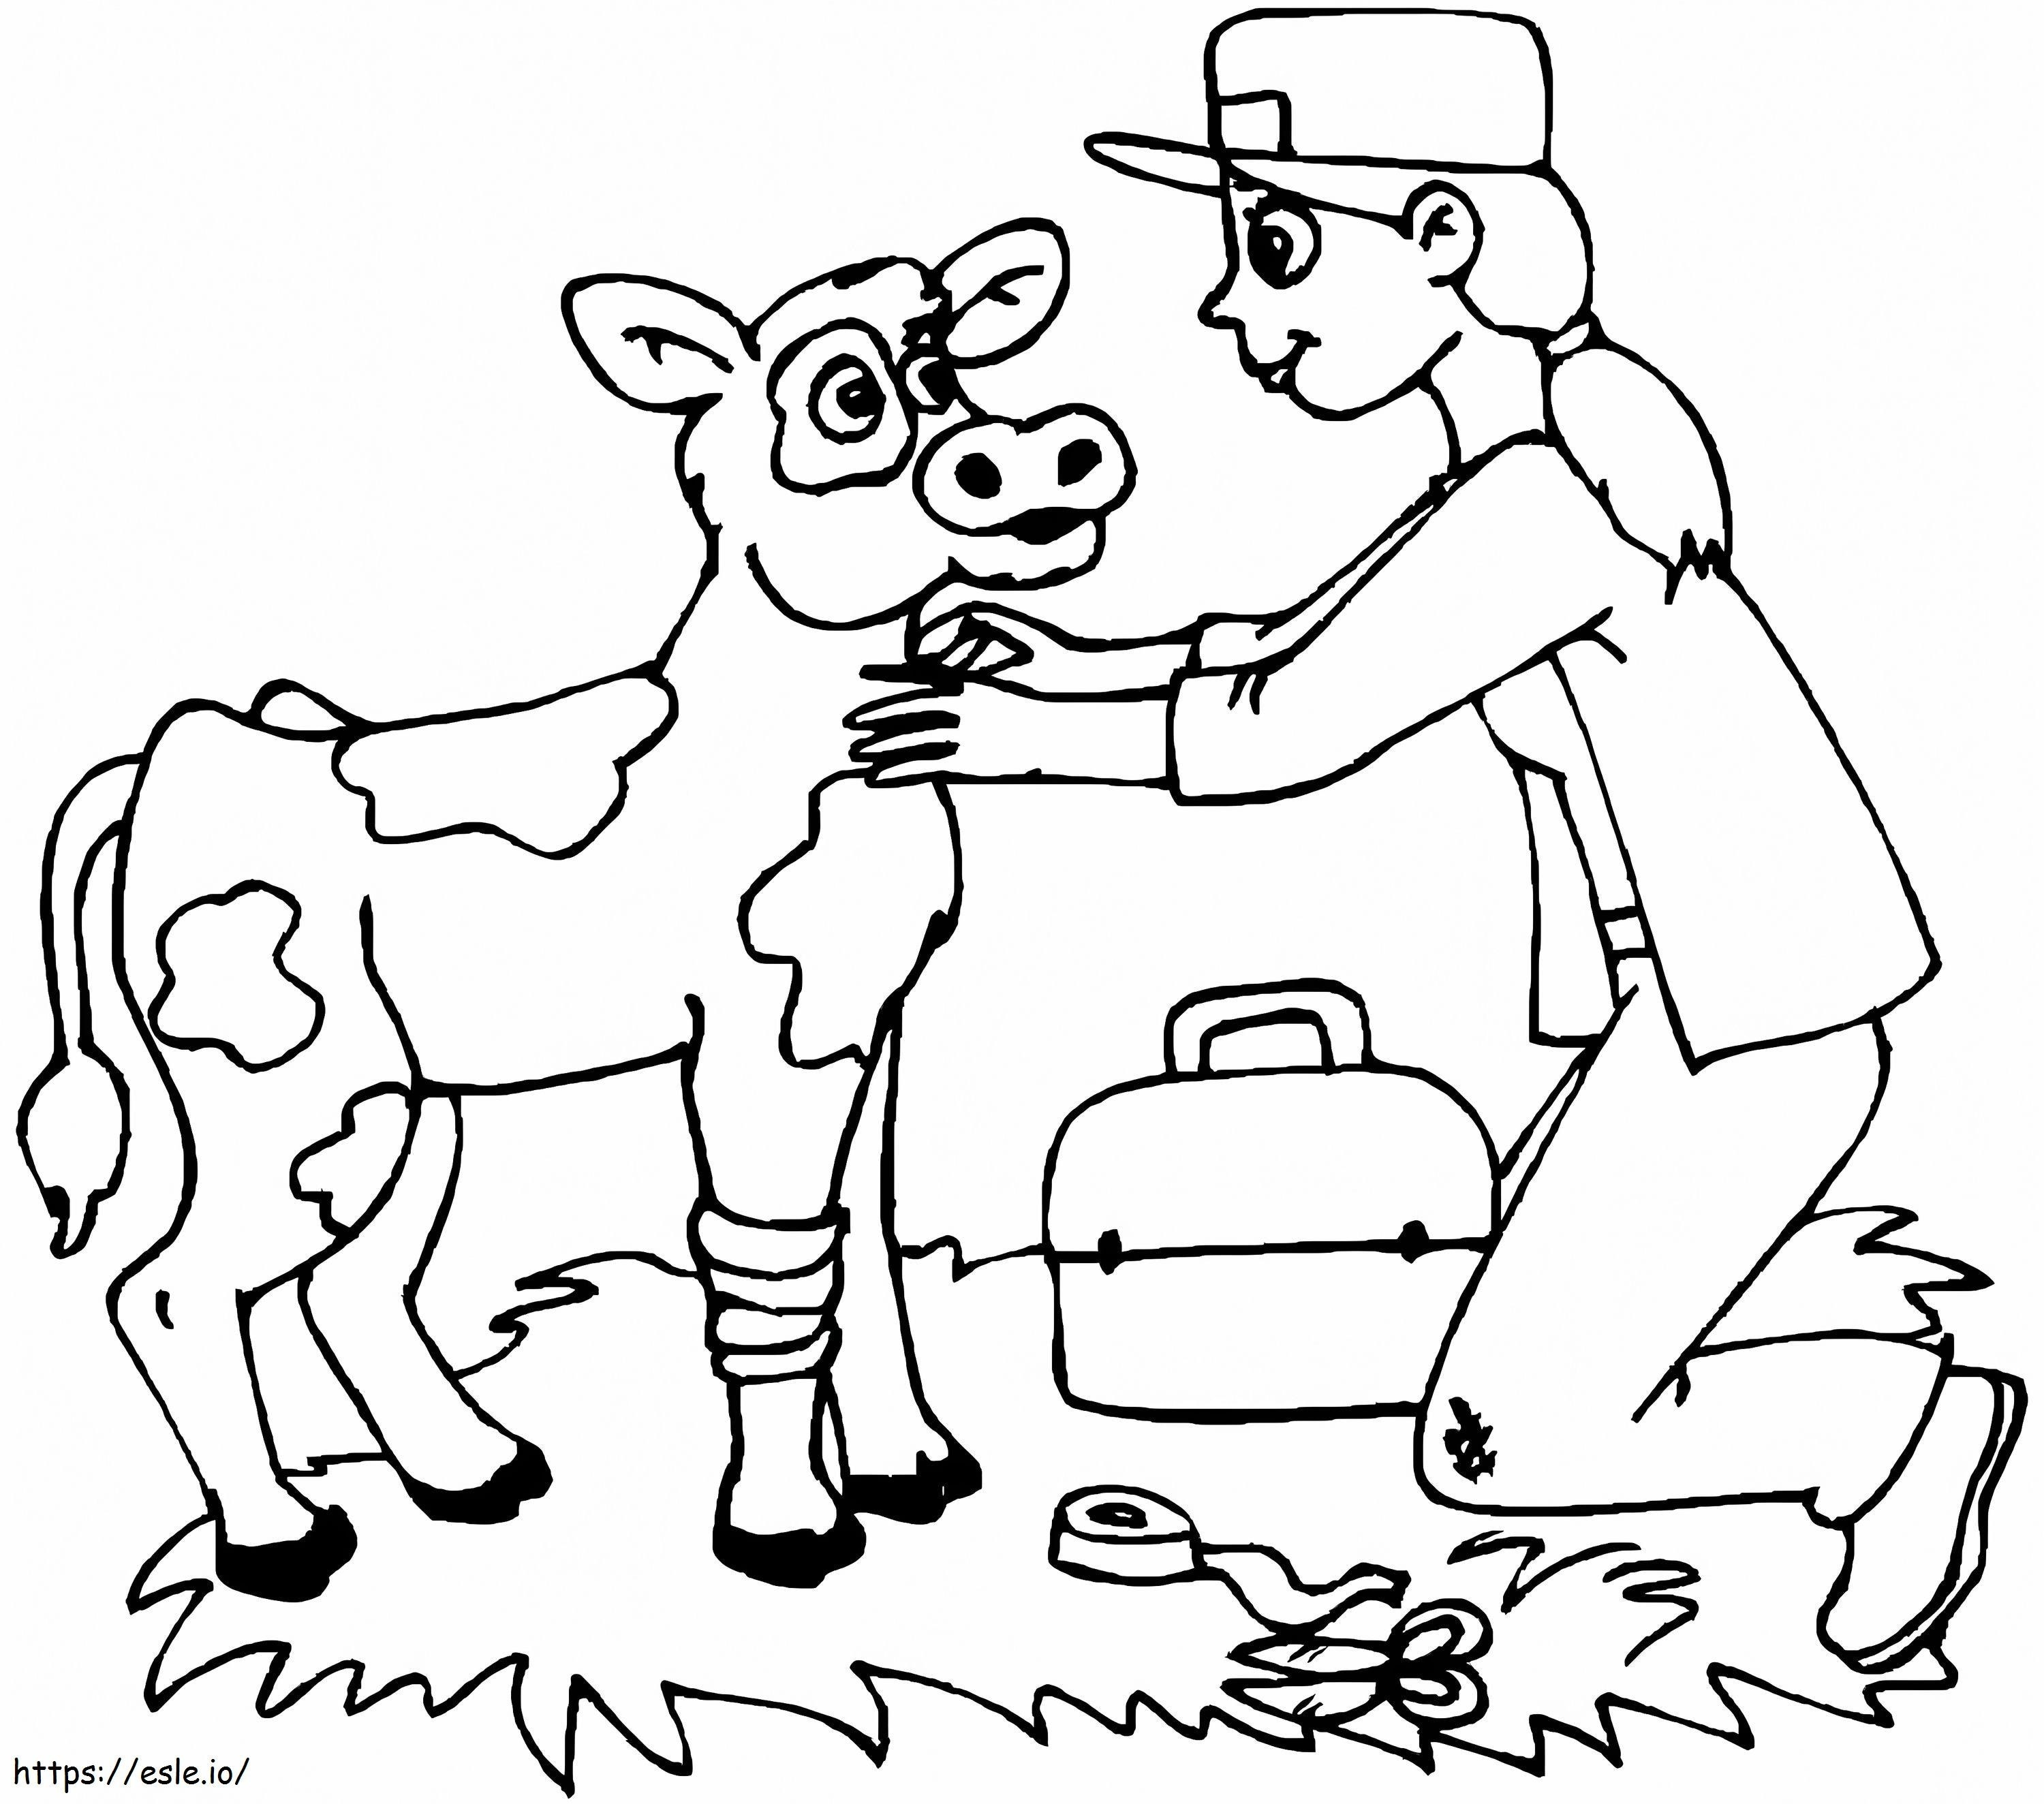 Veterinarian And A Cow coloring page